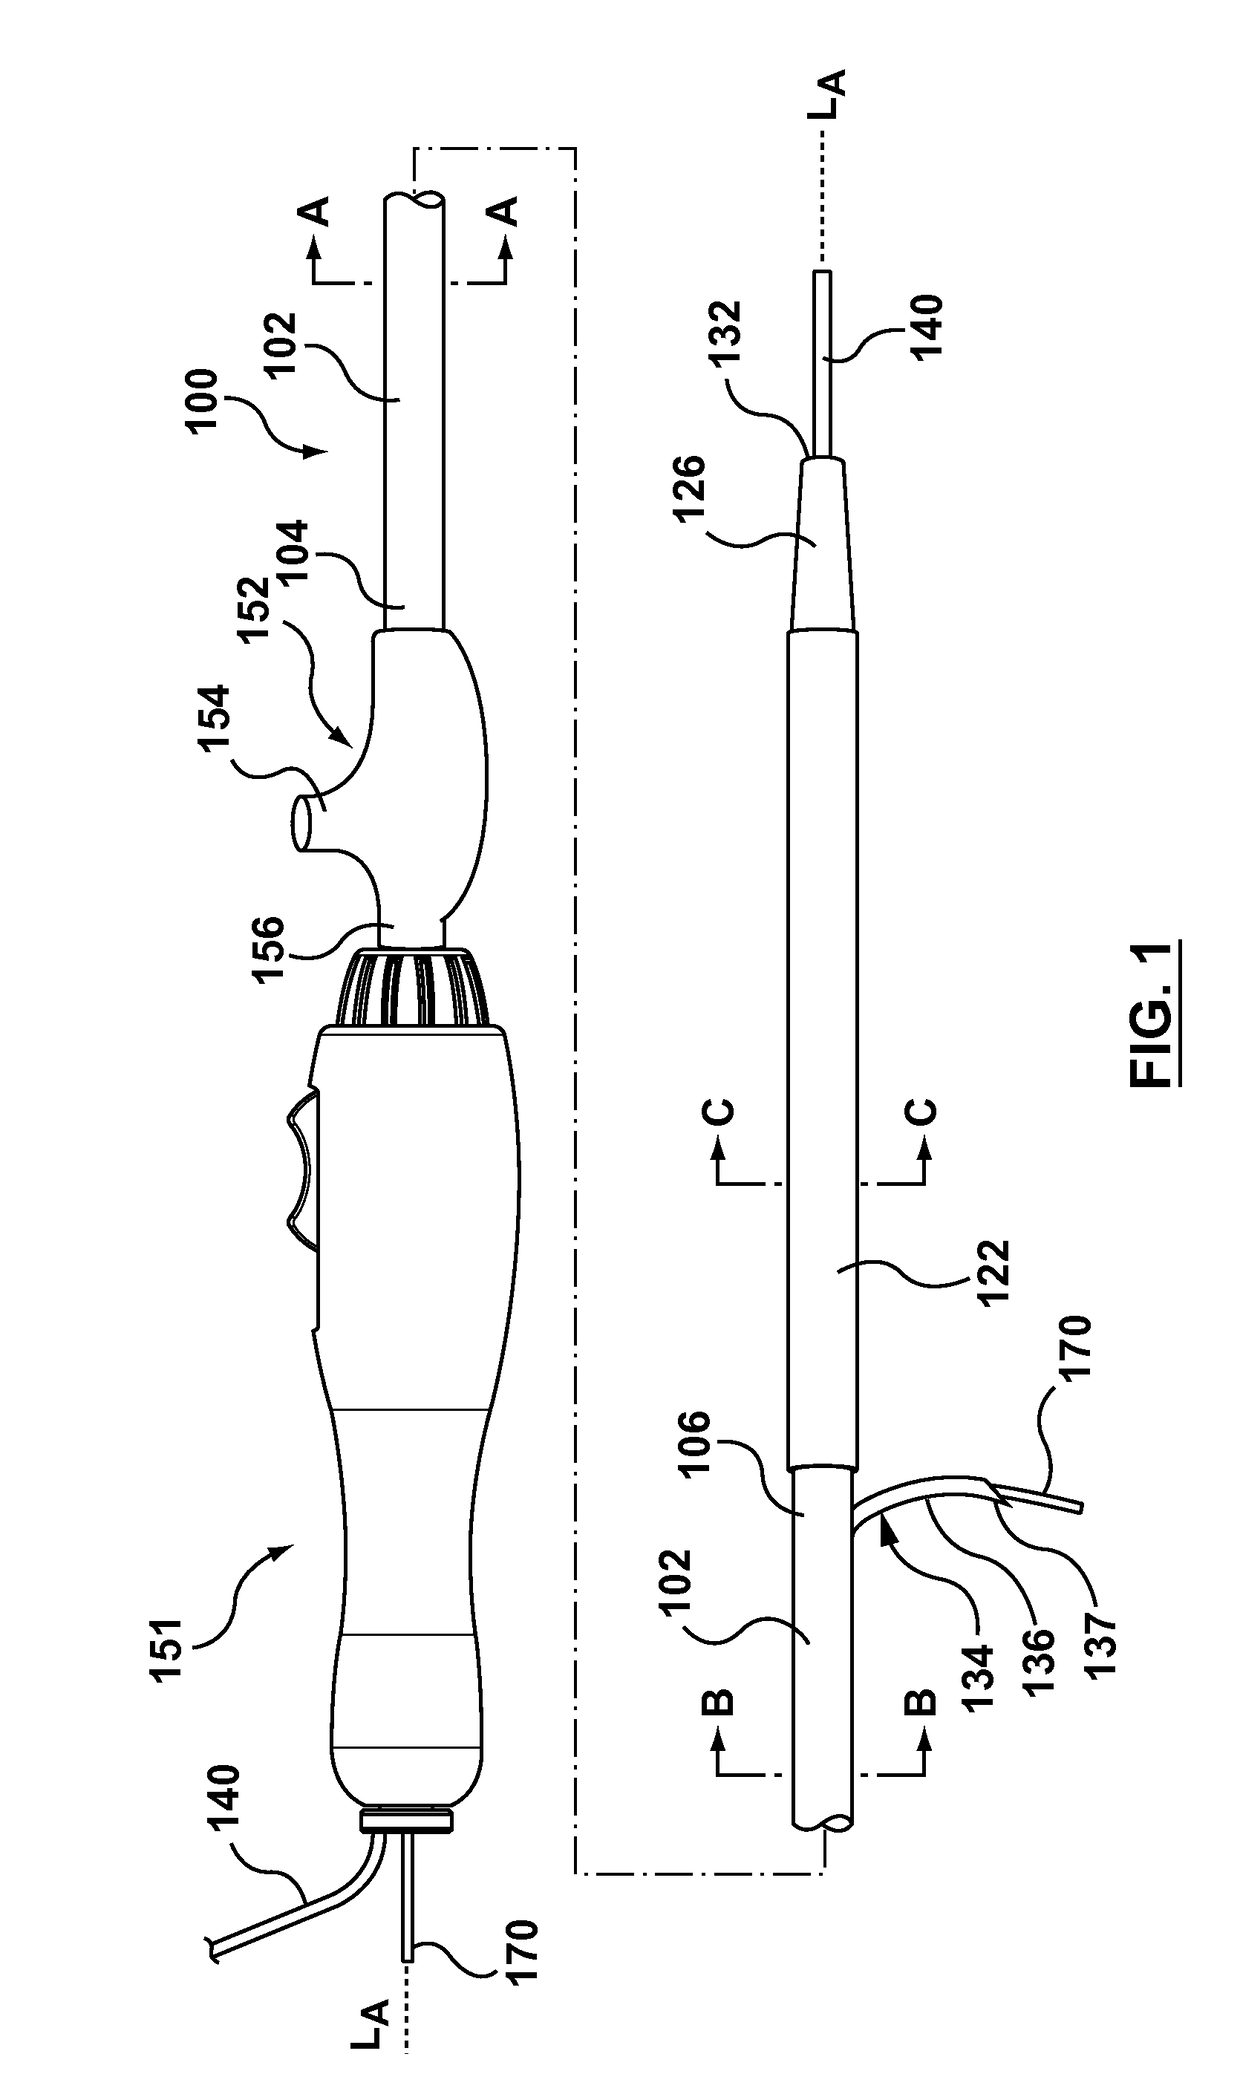 Occlusion Bypassing Apparatus With A Re-Entry Needle and a Distal Stabilization Balloon